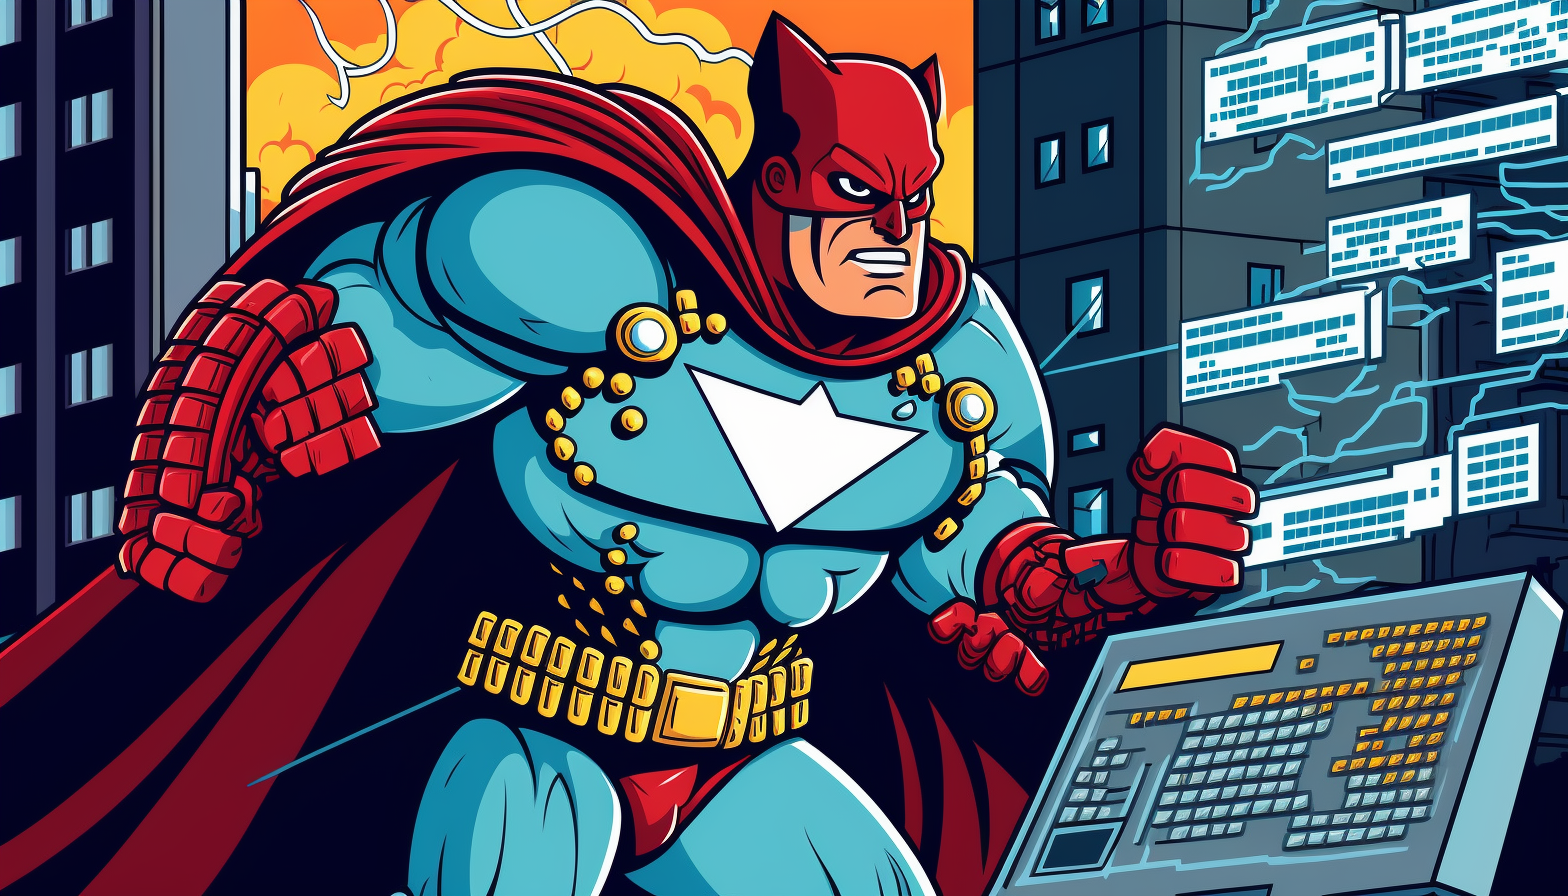 A cartoon image of a cybersecurity superhero defending a city against cyber threats.